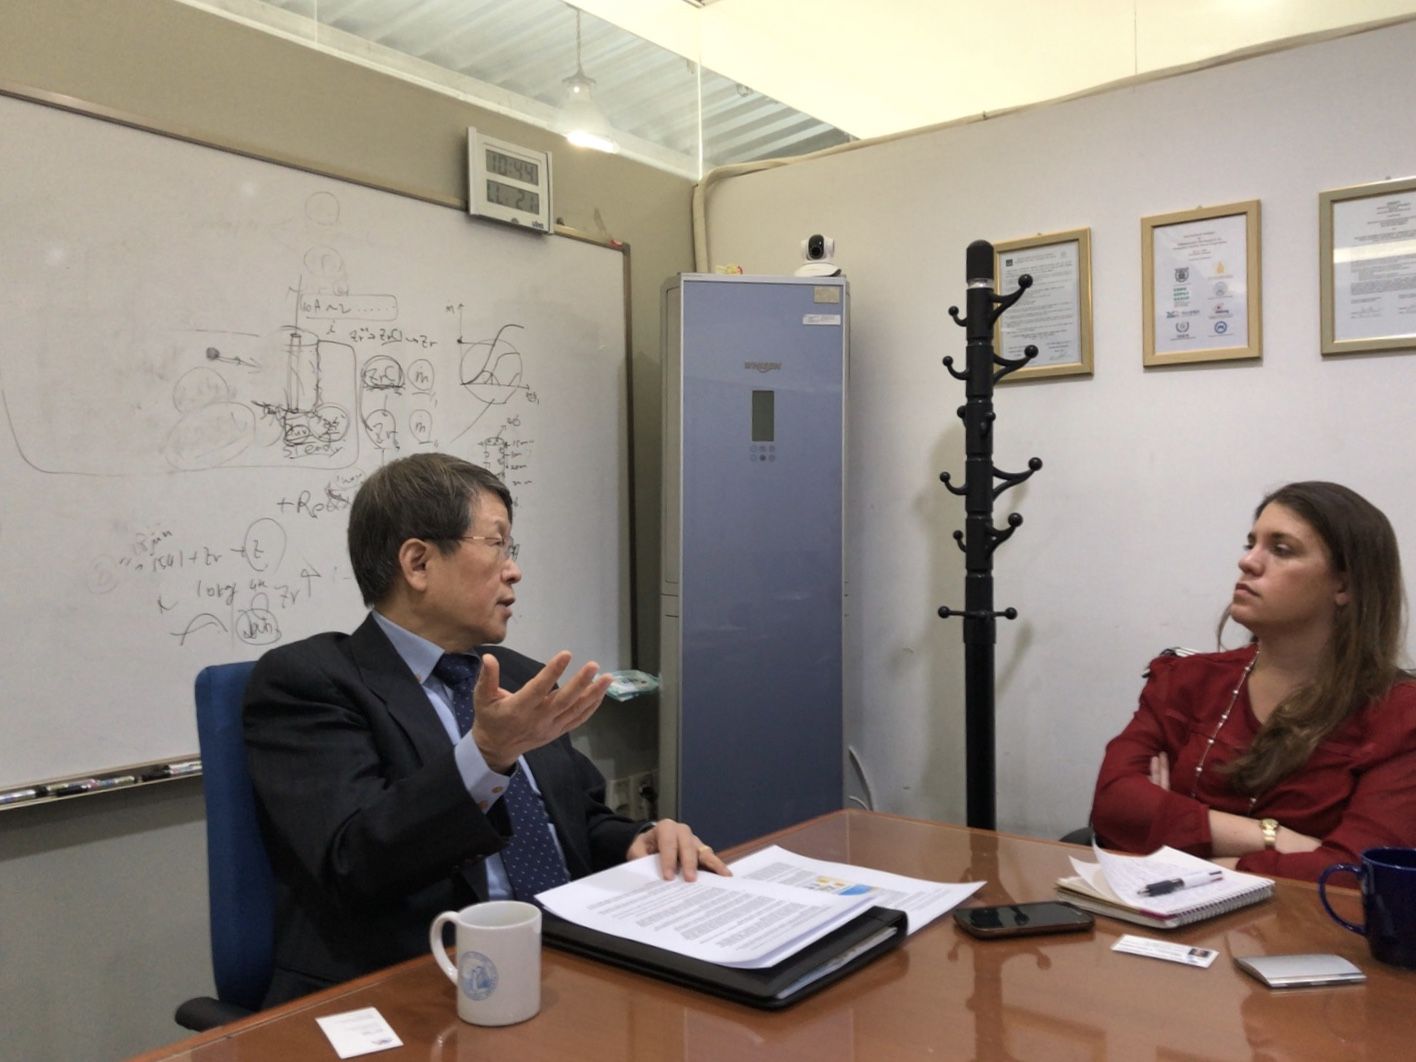 Hwang Il-soon, a nuclear engineering professor at Seoul National University who supports his country having a pyro-processing capability, speaks with Pulitzer Center grantee Rachel Oswald. Image by Jayine Chung. South Korea, 2018.